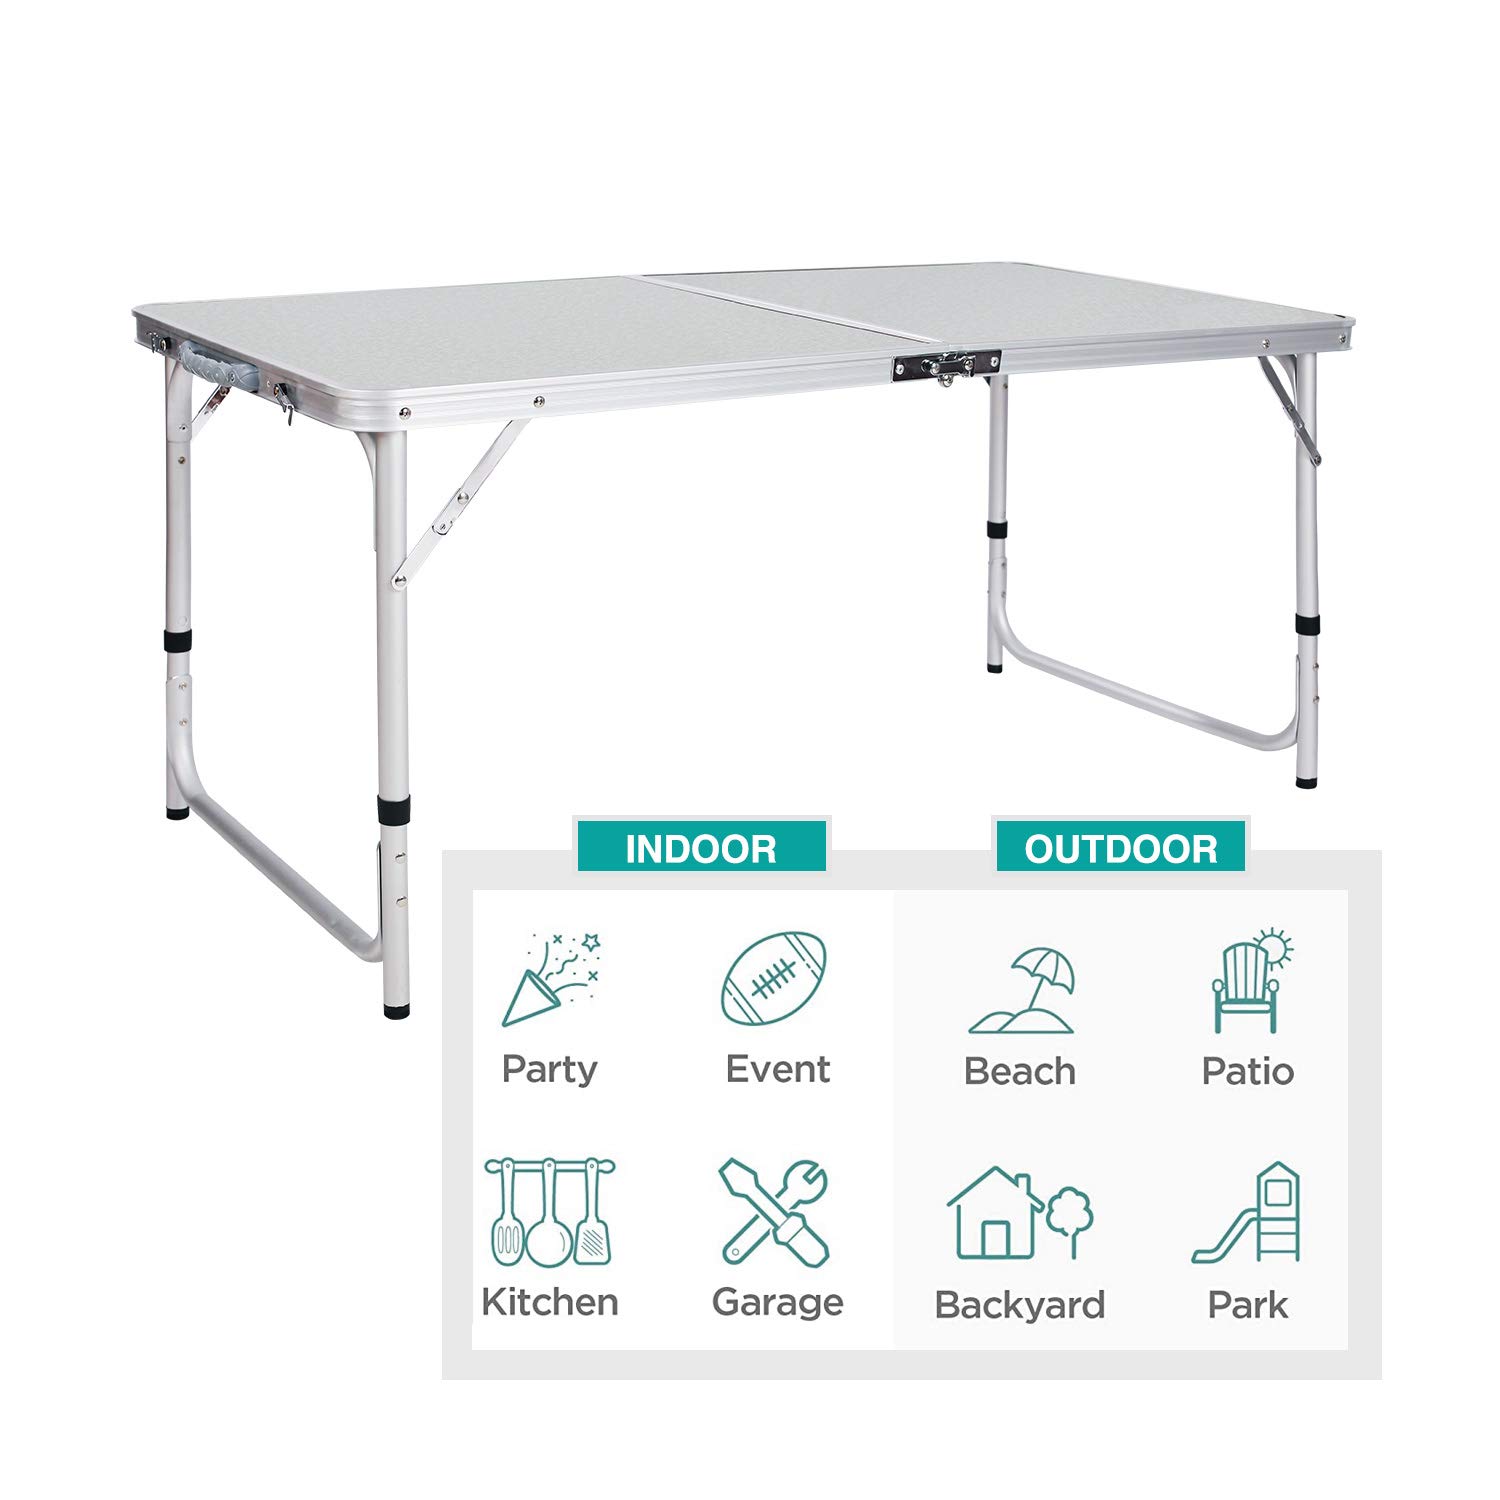 CAMPMOON Folding Camping Table 4 Foot, Lightweight Portable Aluminum Folding Table with Adjustable Legs, Great for Outdoor Cooking Picnic, White